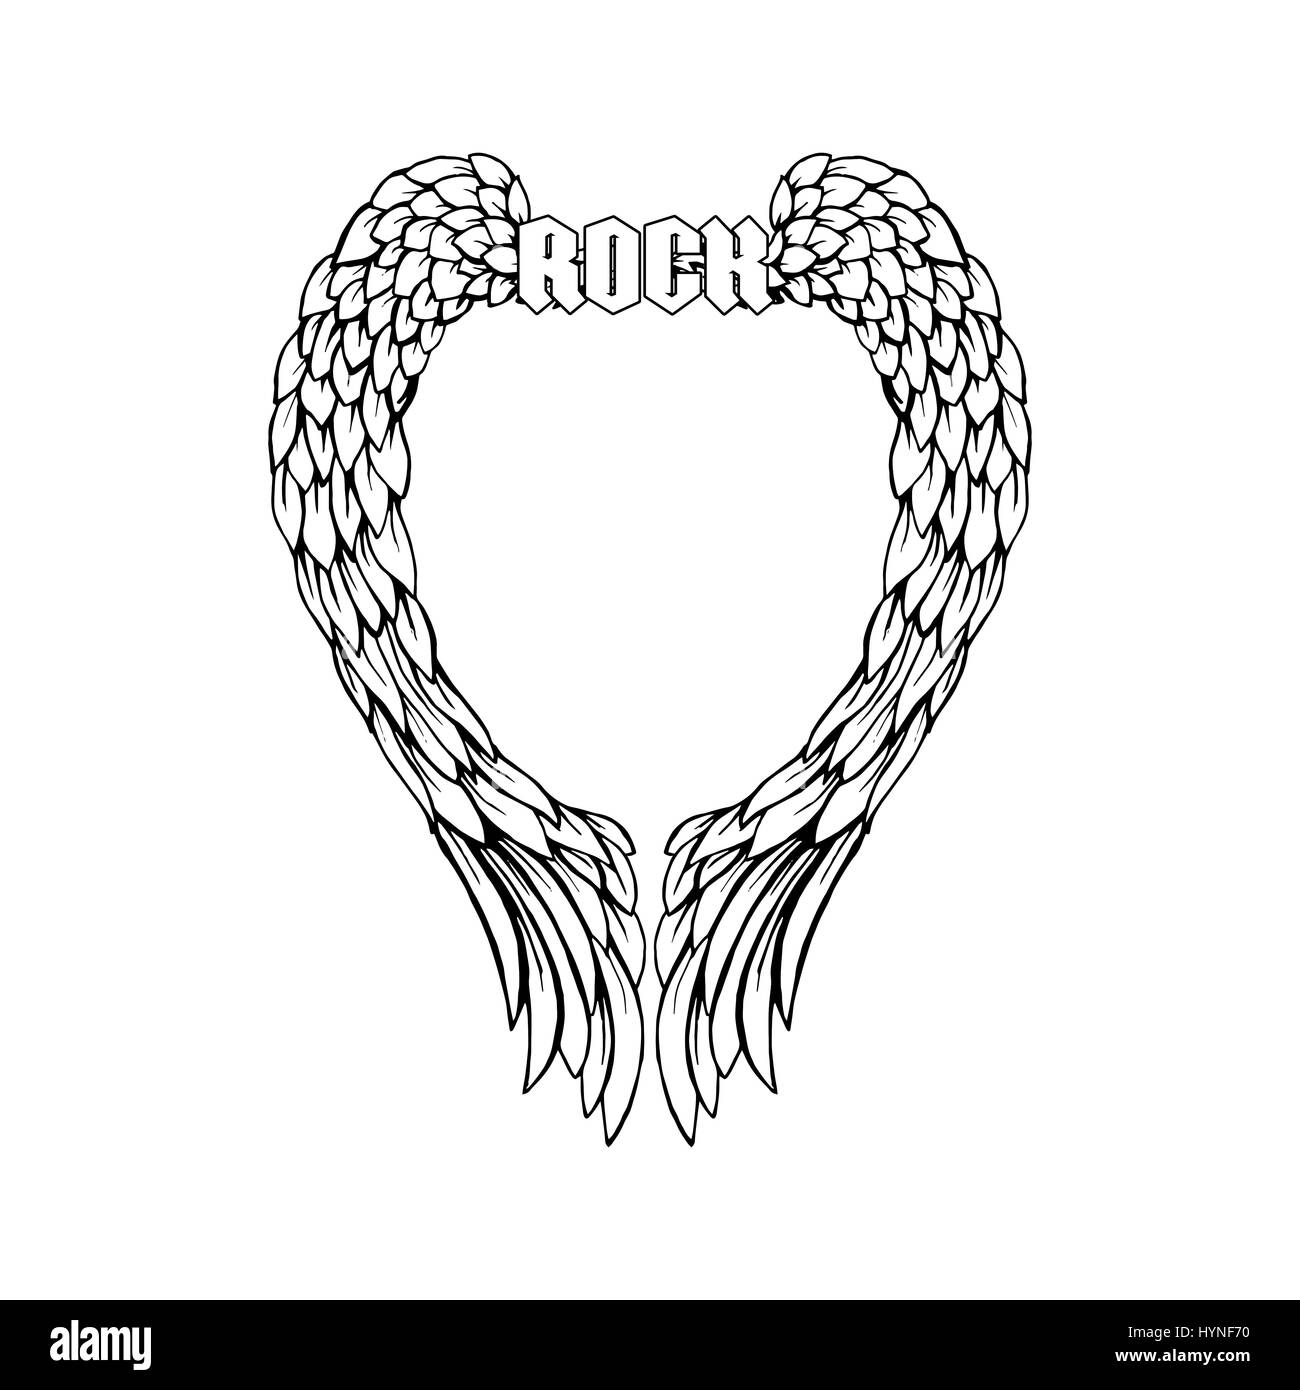 Retro t-shirt print or music disk cover with angel wings and grunge texture Stock Vector